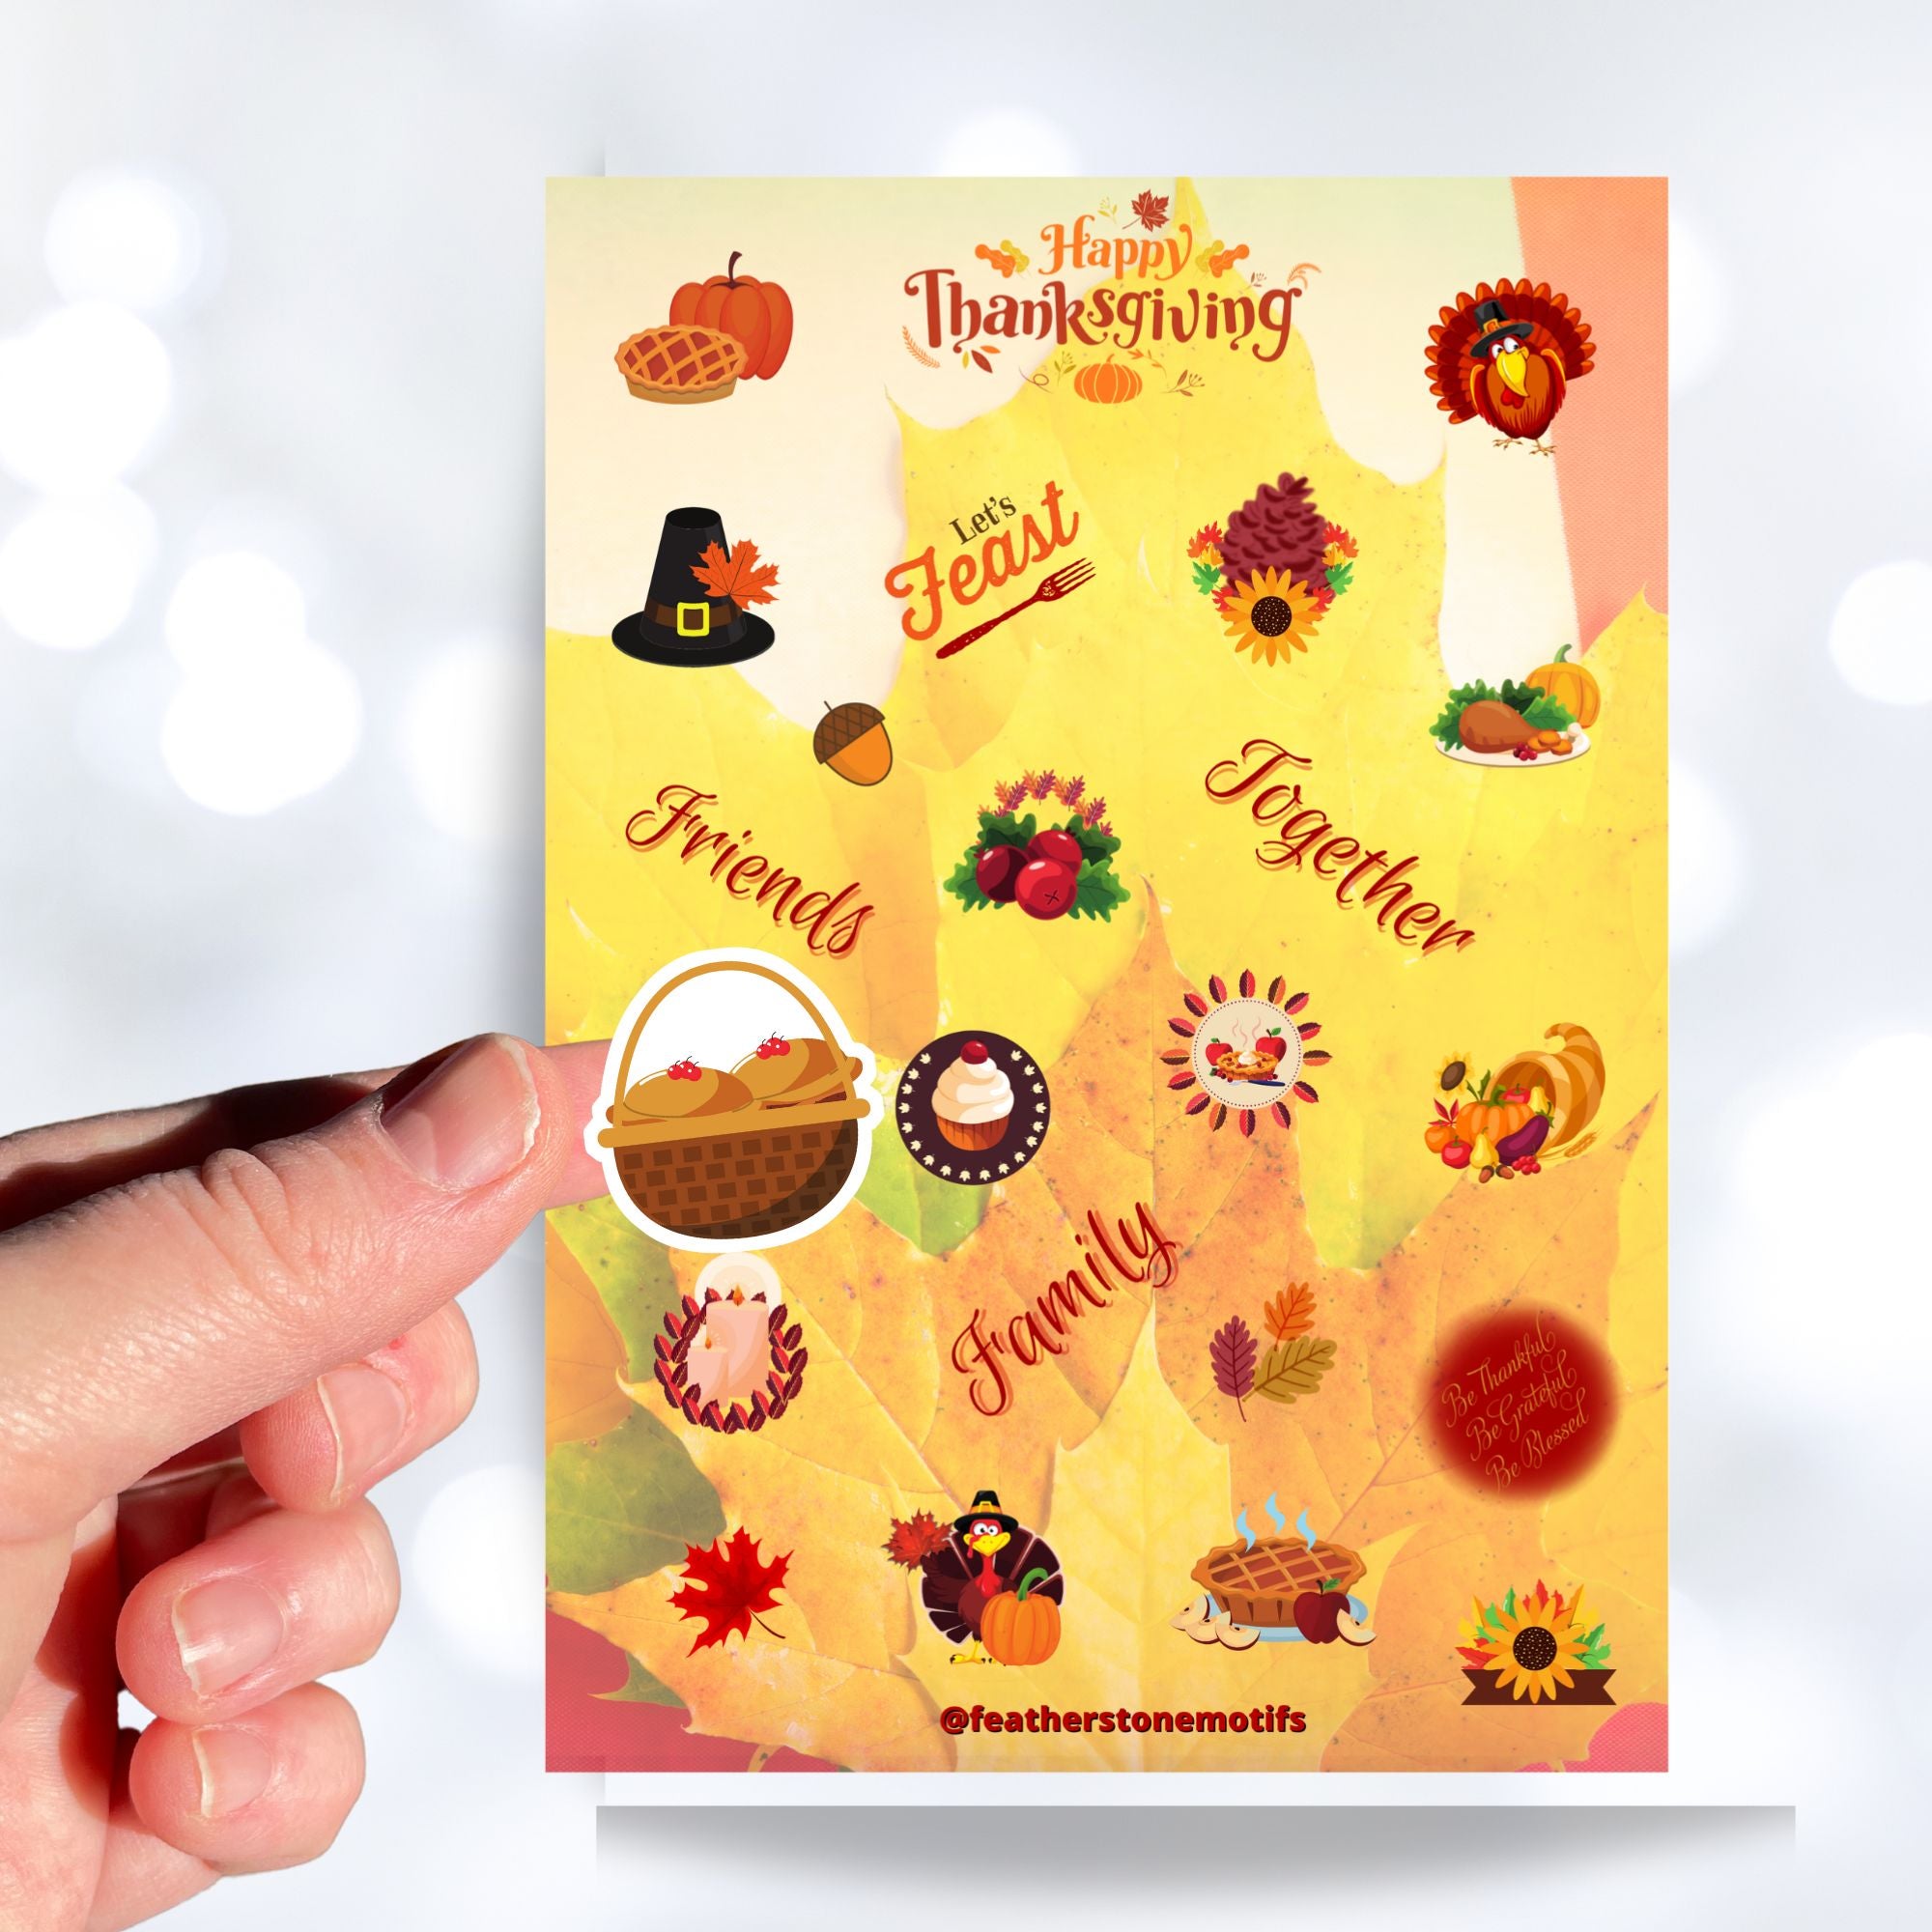 This festive Thanksgiving sticker sheet is perfect for decorating or scrapbooking. It features all of your favorite Thanksgiving images and inspirational sayings. Let the feast begin! This image shows a hand holding a basket of pies over the Happy Thanksgiving sticker sheet.